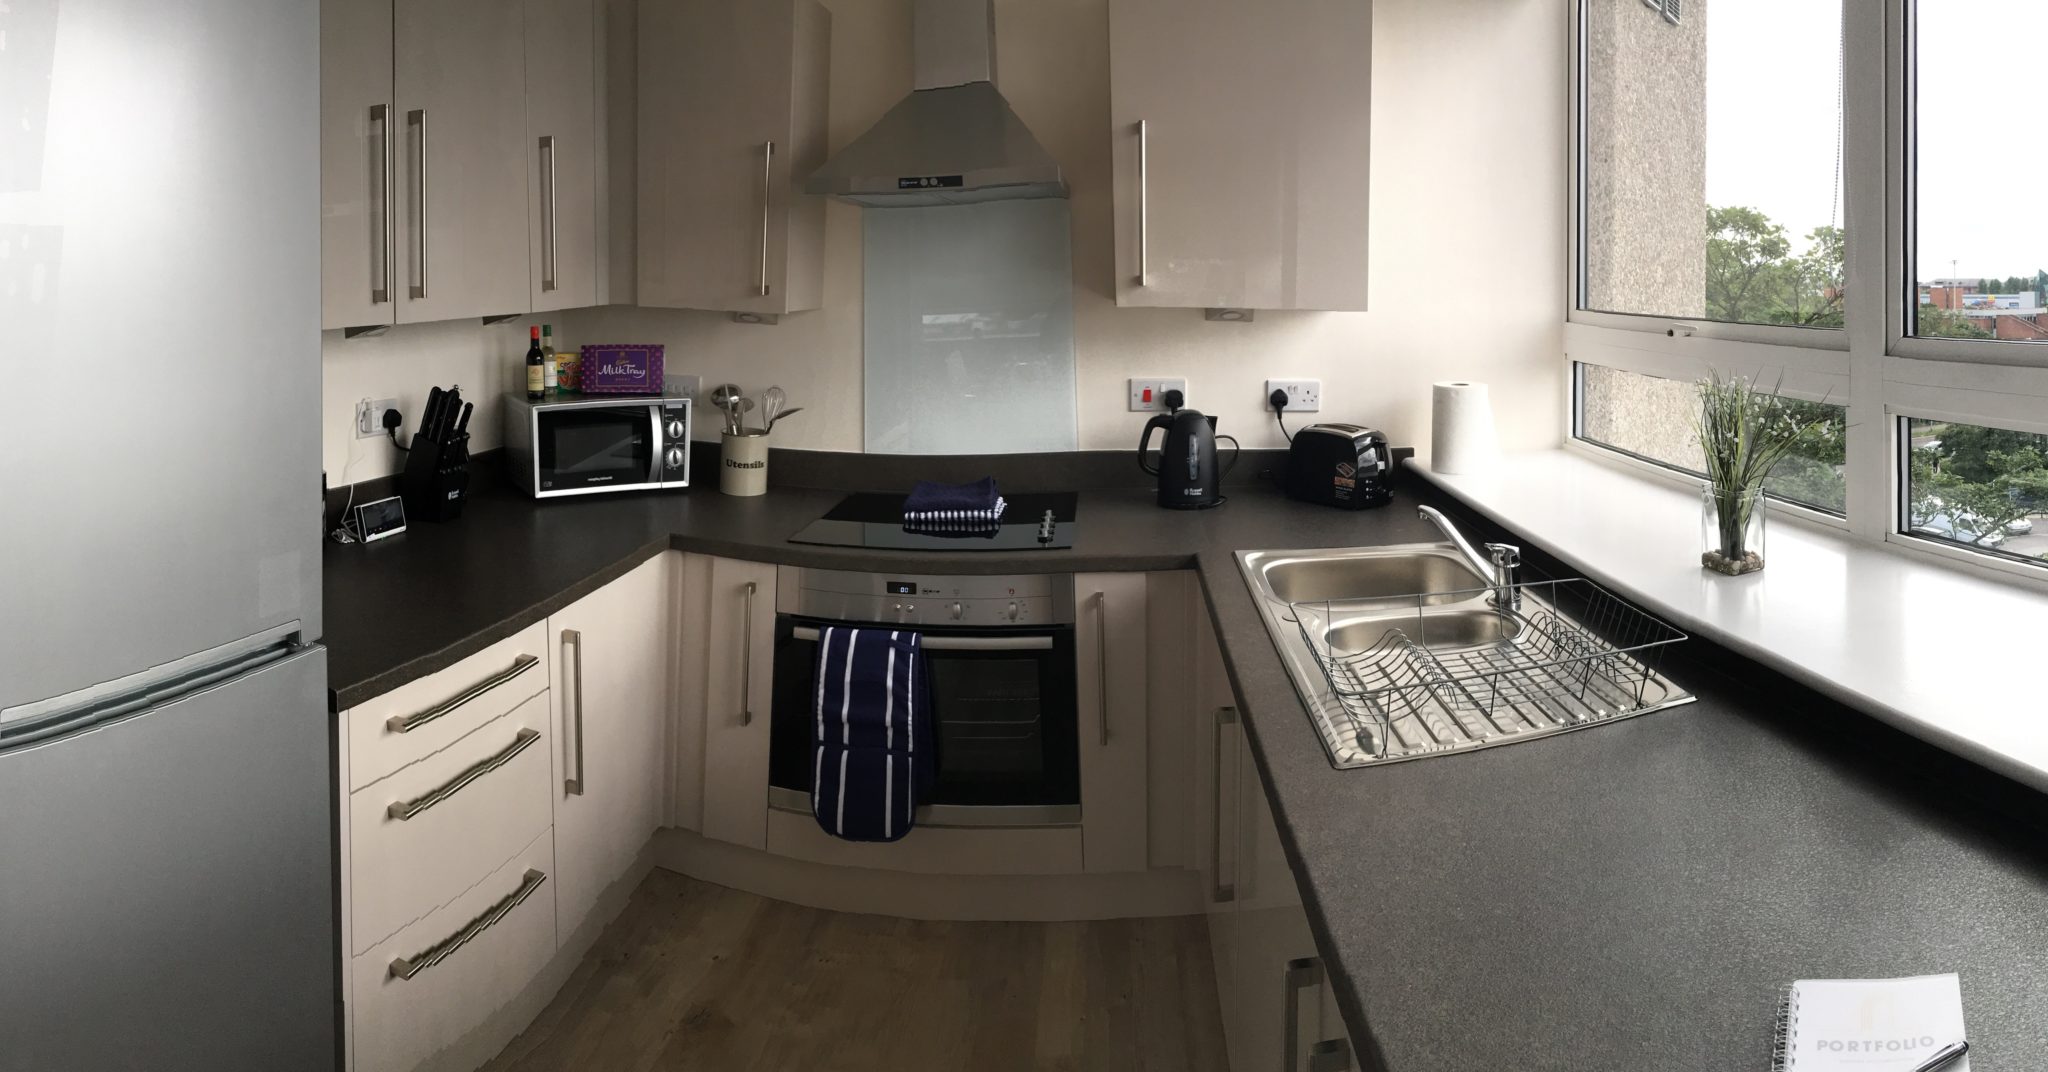 Luxury-Serviced-Apartments-Stevenage-|Short-Let-Apartments|-Free-Wifi-|-Welcome-Pack-&-Fully-Equipped-Kitchen-|-Book-Today|-Urban-Stay